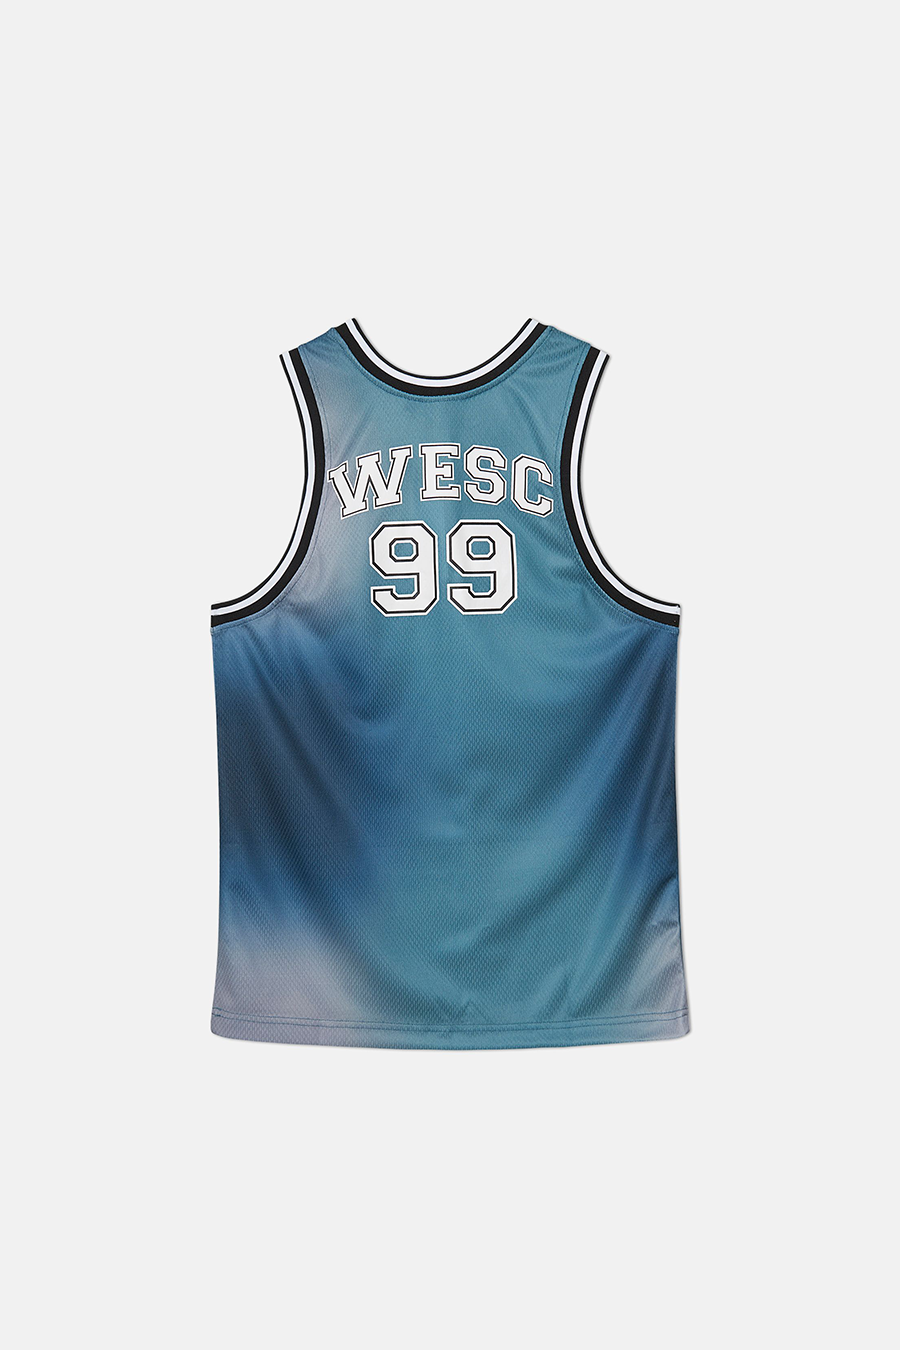 Basketball Tank Gradient | Dusty Teal - Main Image Number 2 of 2